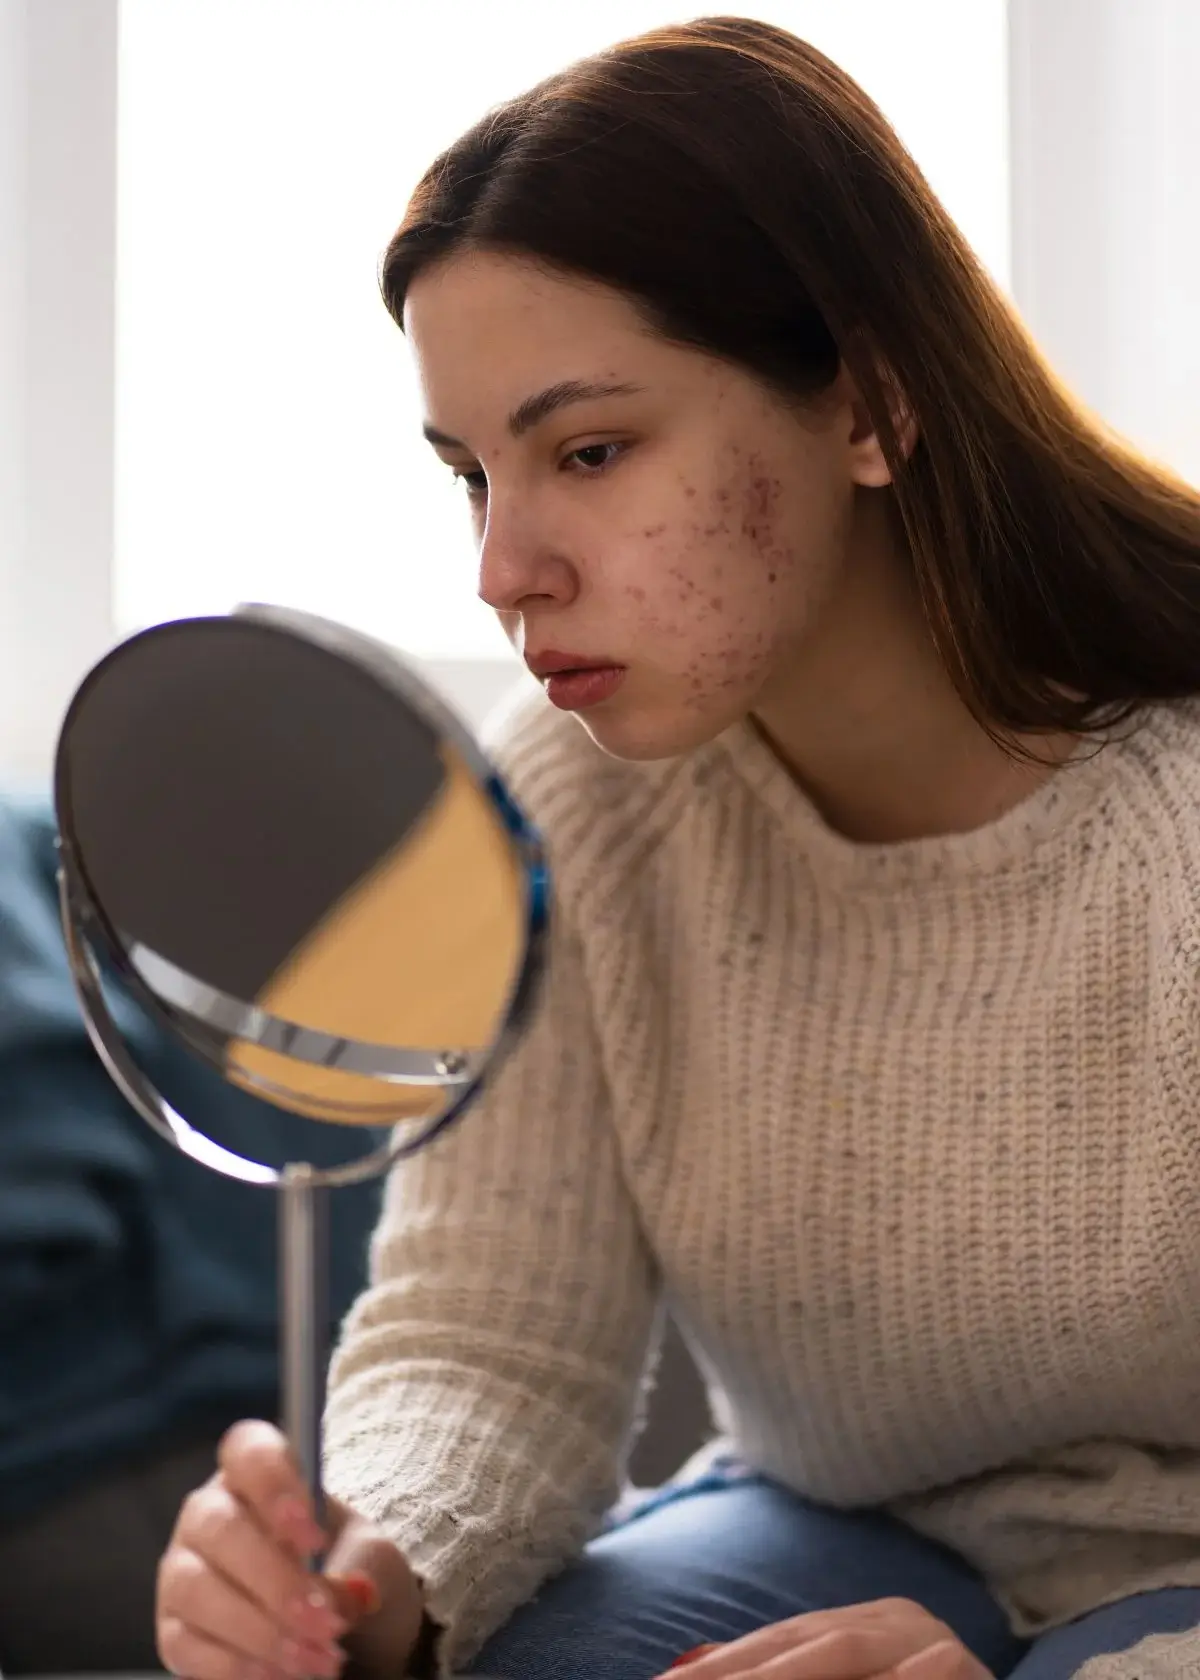 How to choose the right foundation to cover acne scars?